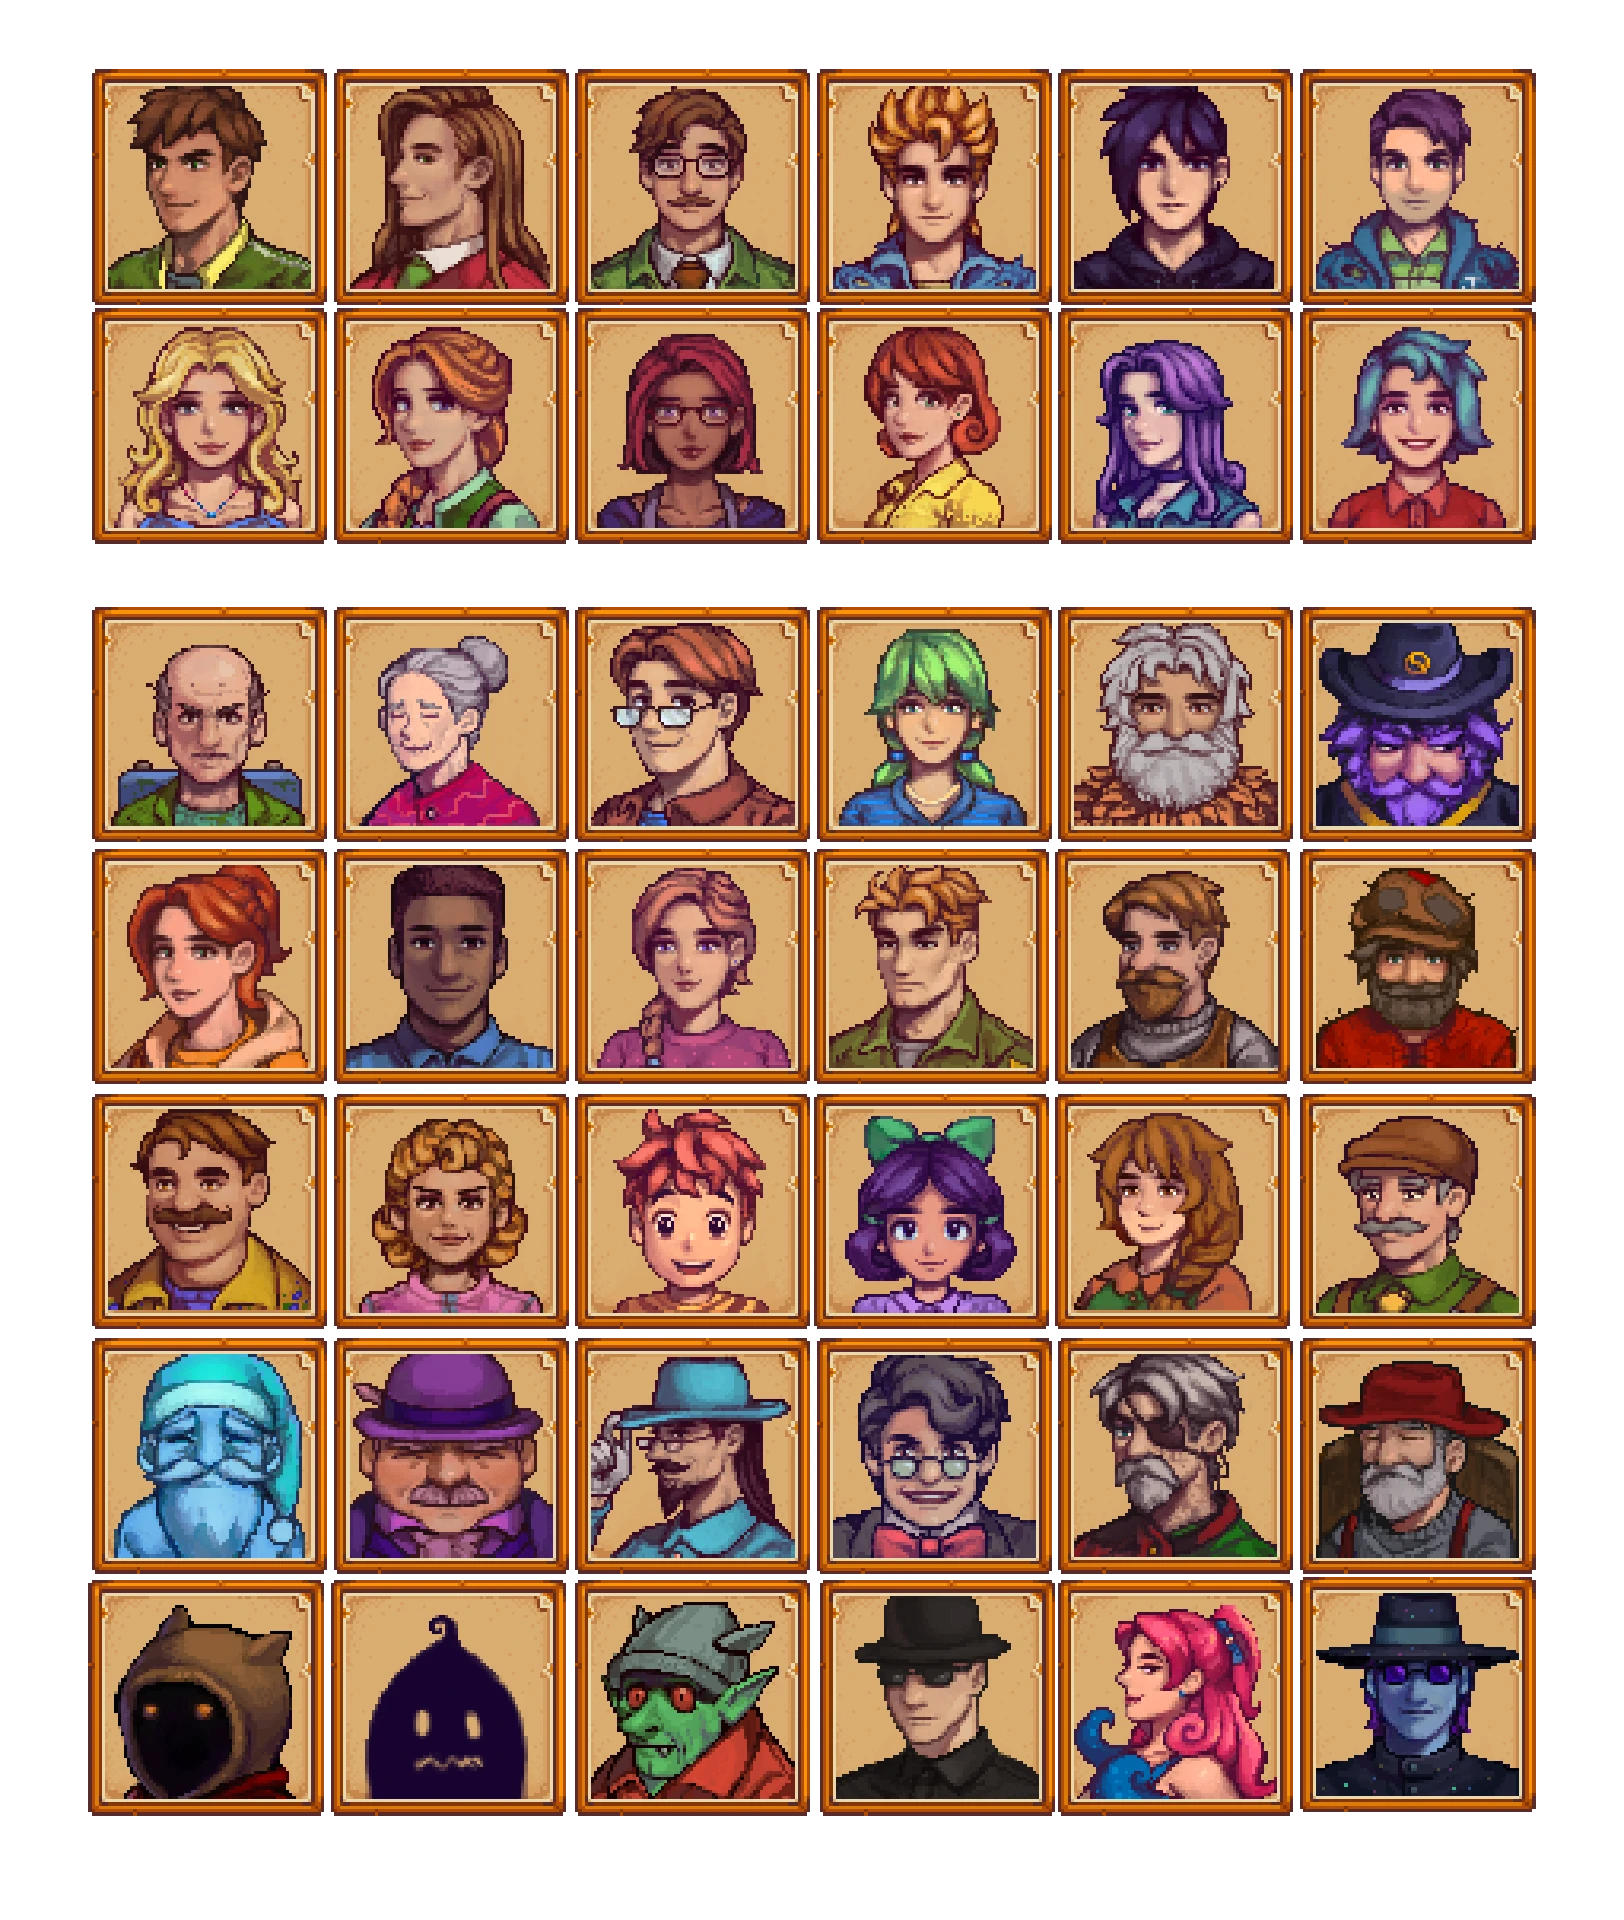 stardew valley characters